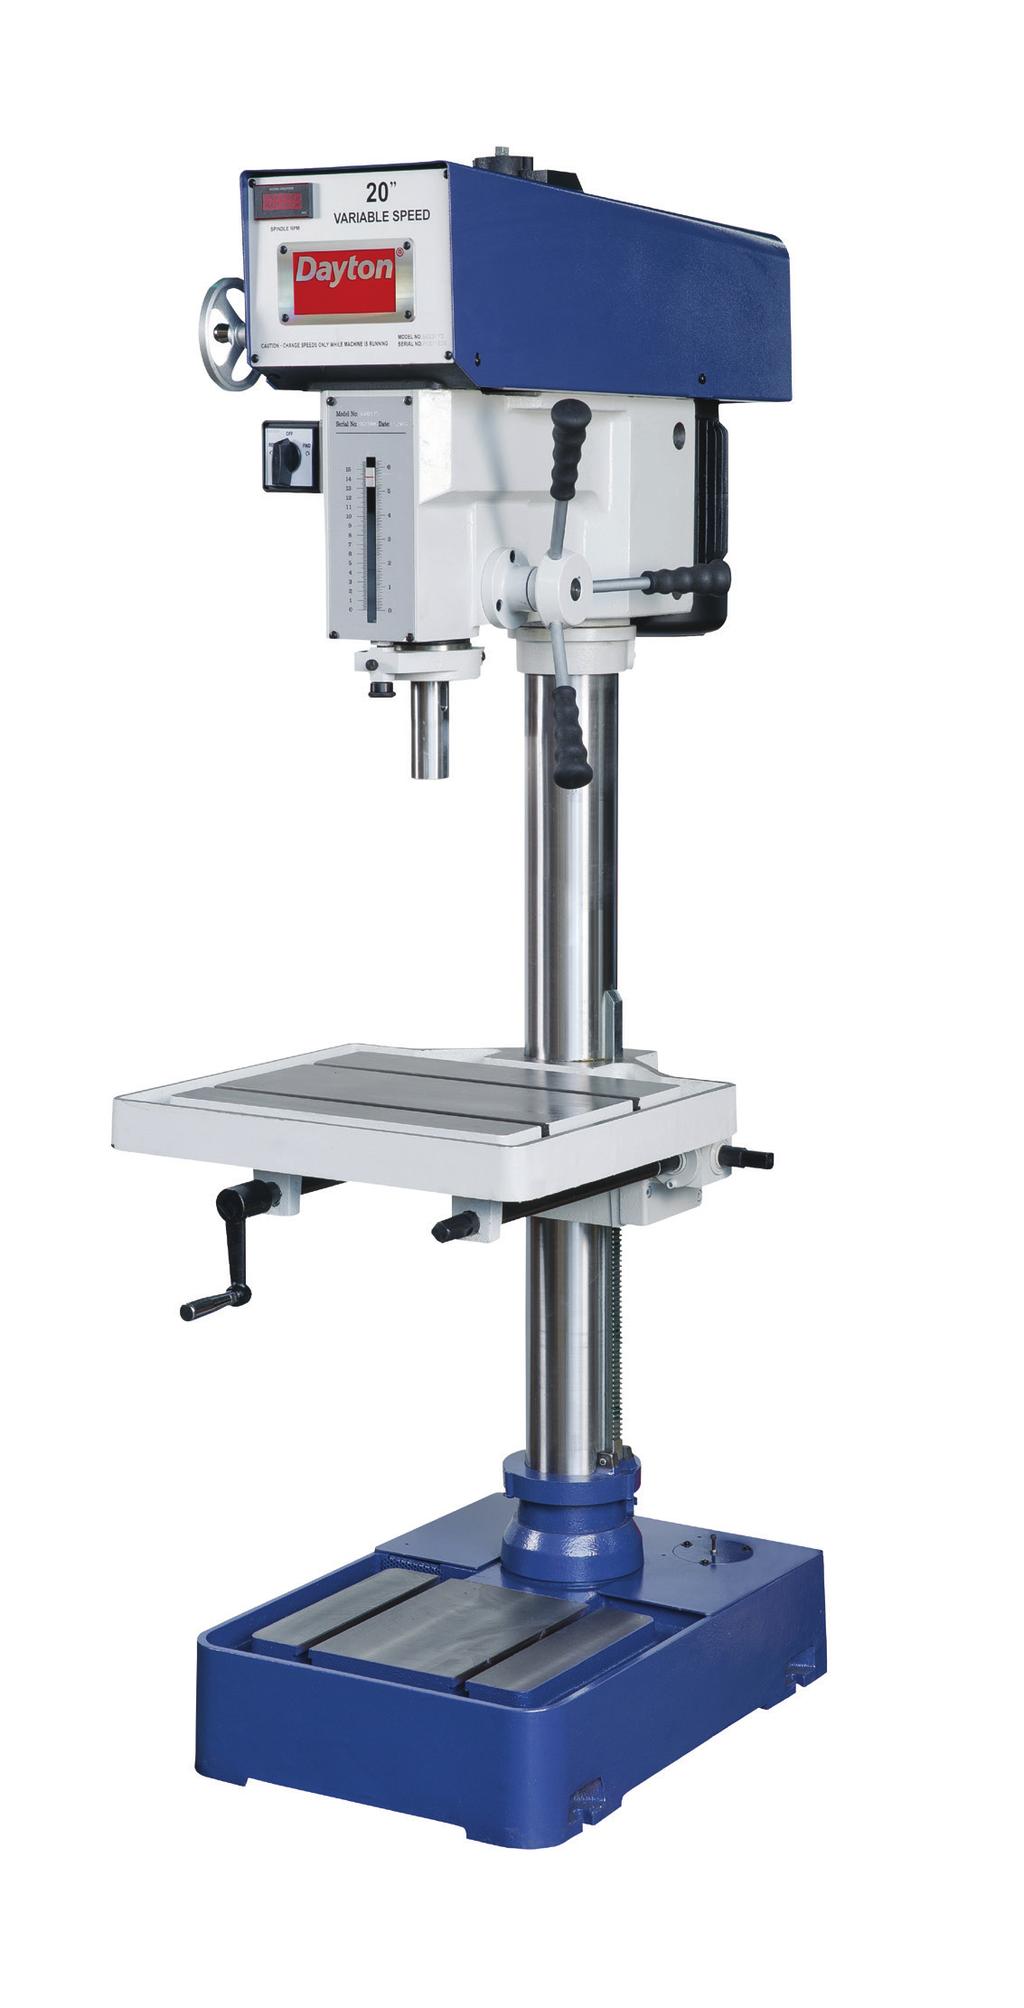 20" VARIABLE SPEED DRILL PRESS With the Dayton 20" variable speed drill press you can dial the best rpm for the tool and material while the job is running.